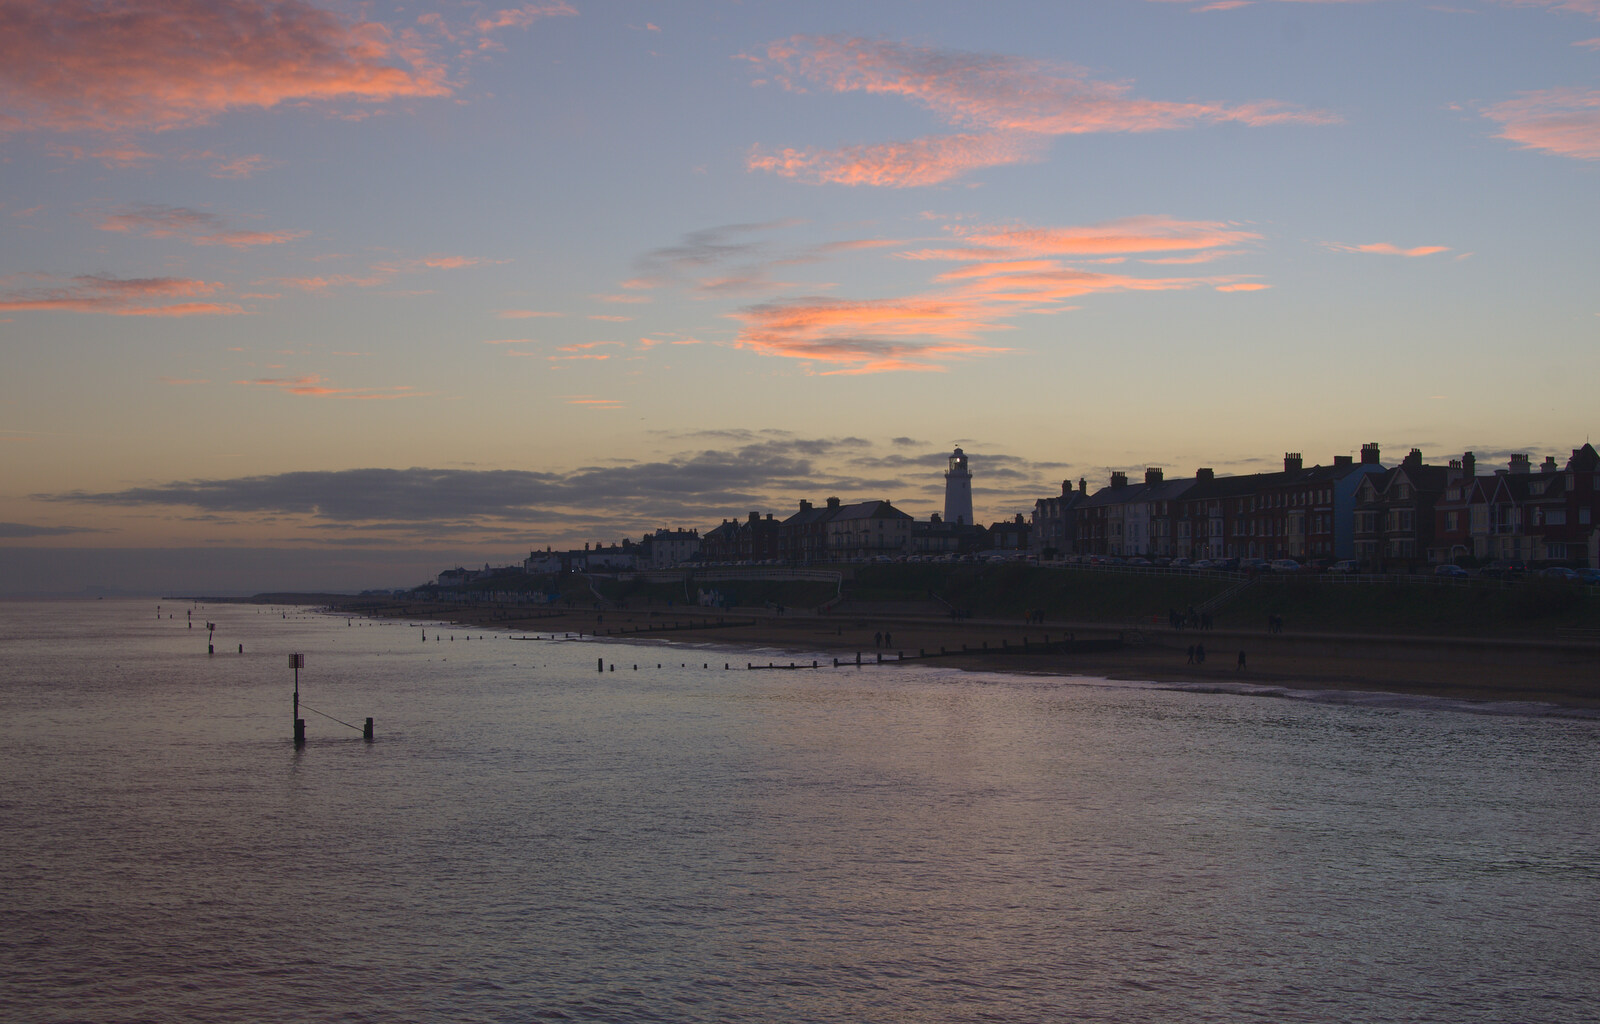 Southwold is a mass of dark from Sunset on the Beach, Southwold, Suffolk - 30th December 2014